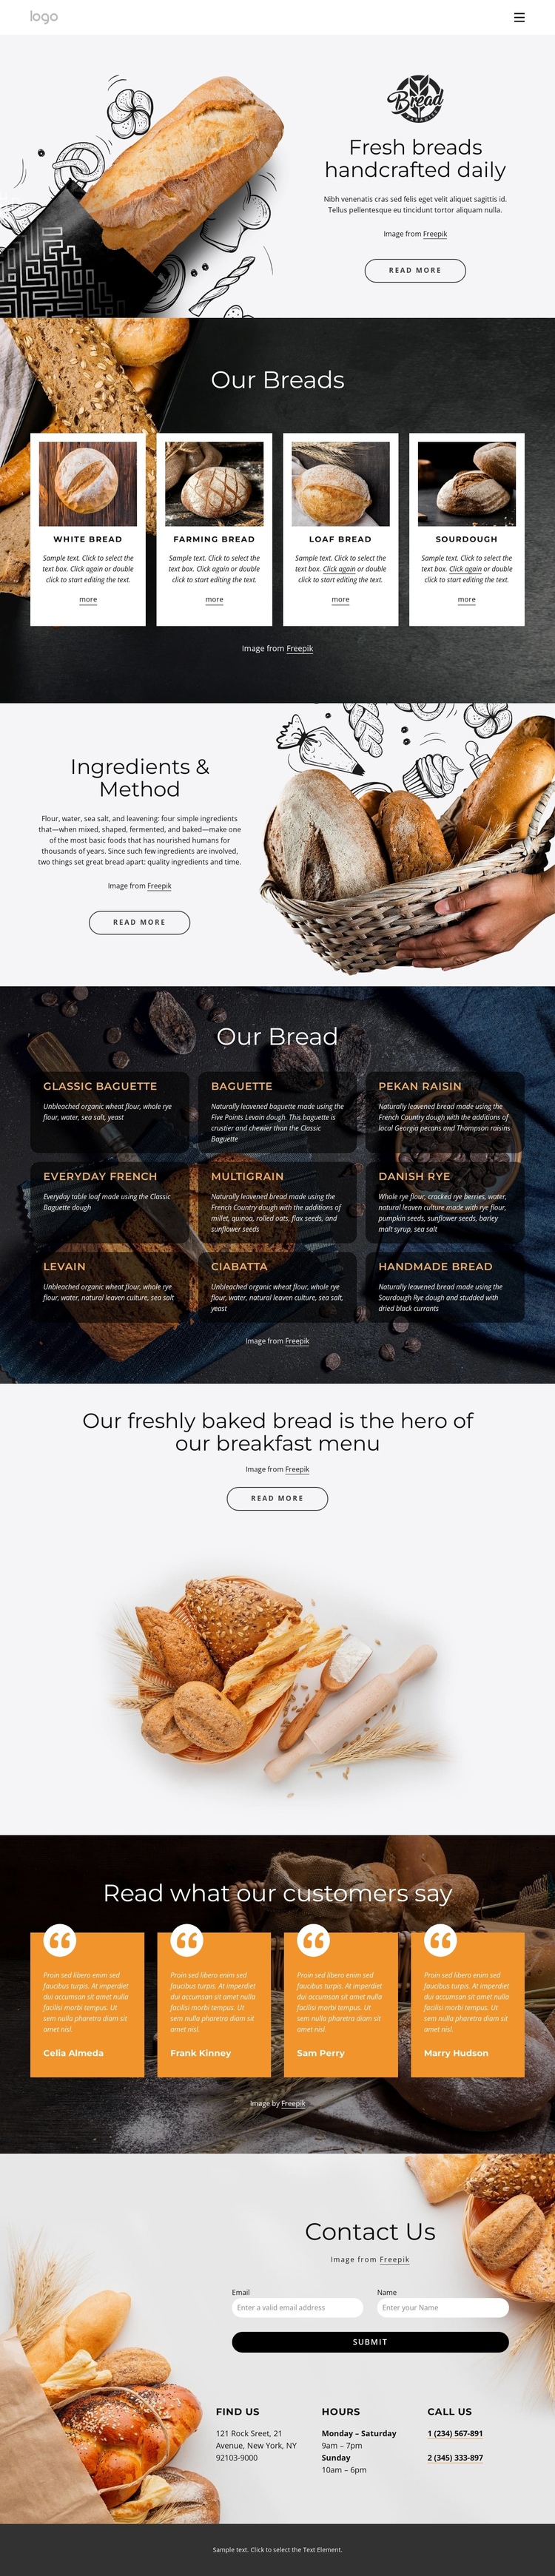 Fresh bread handcrafted every day Website Builder Software